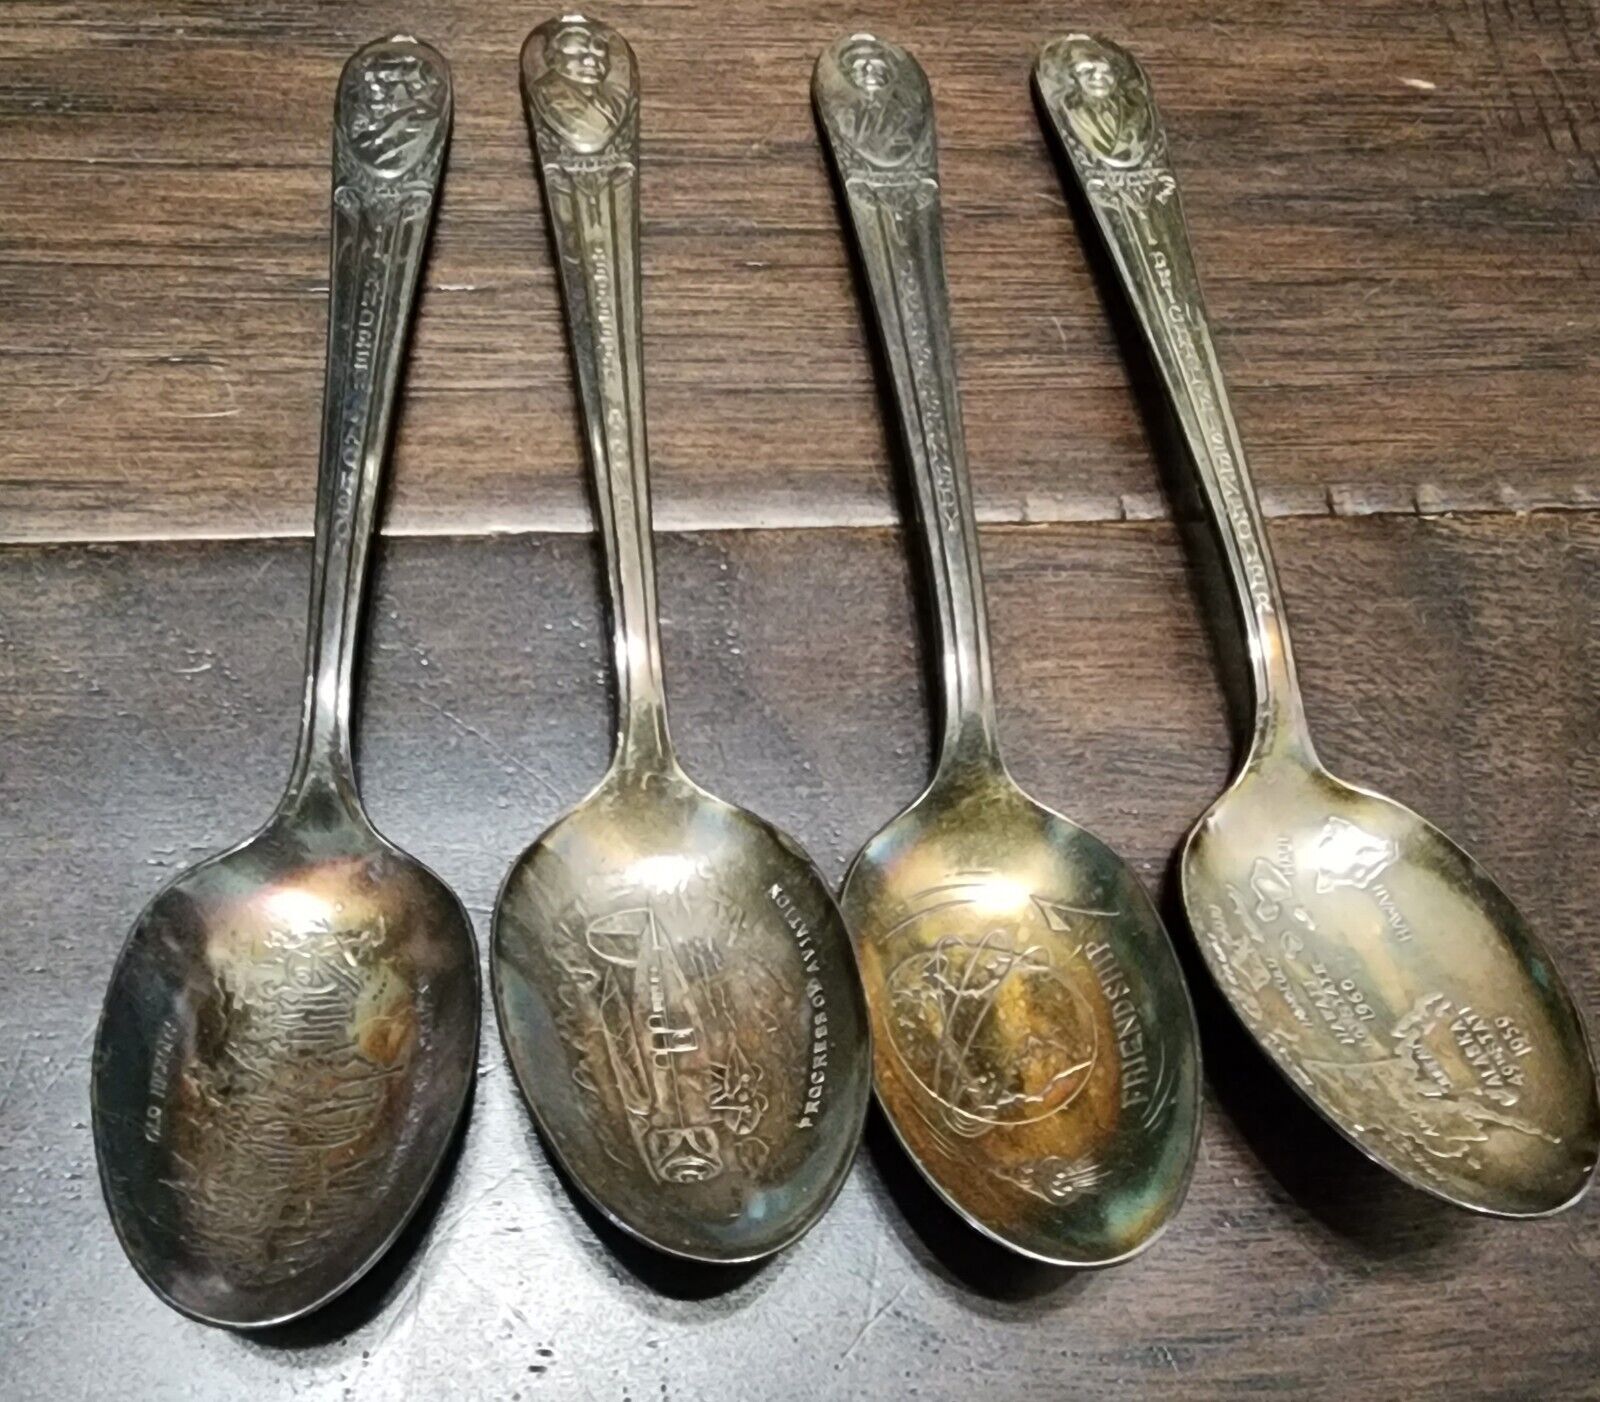 Lot of 4 WM Rogers Presidential Spoons Eisenhower, Kennedy, Hoover, and Jackson